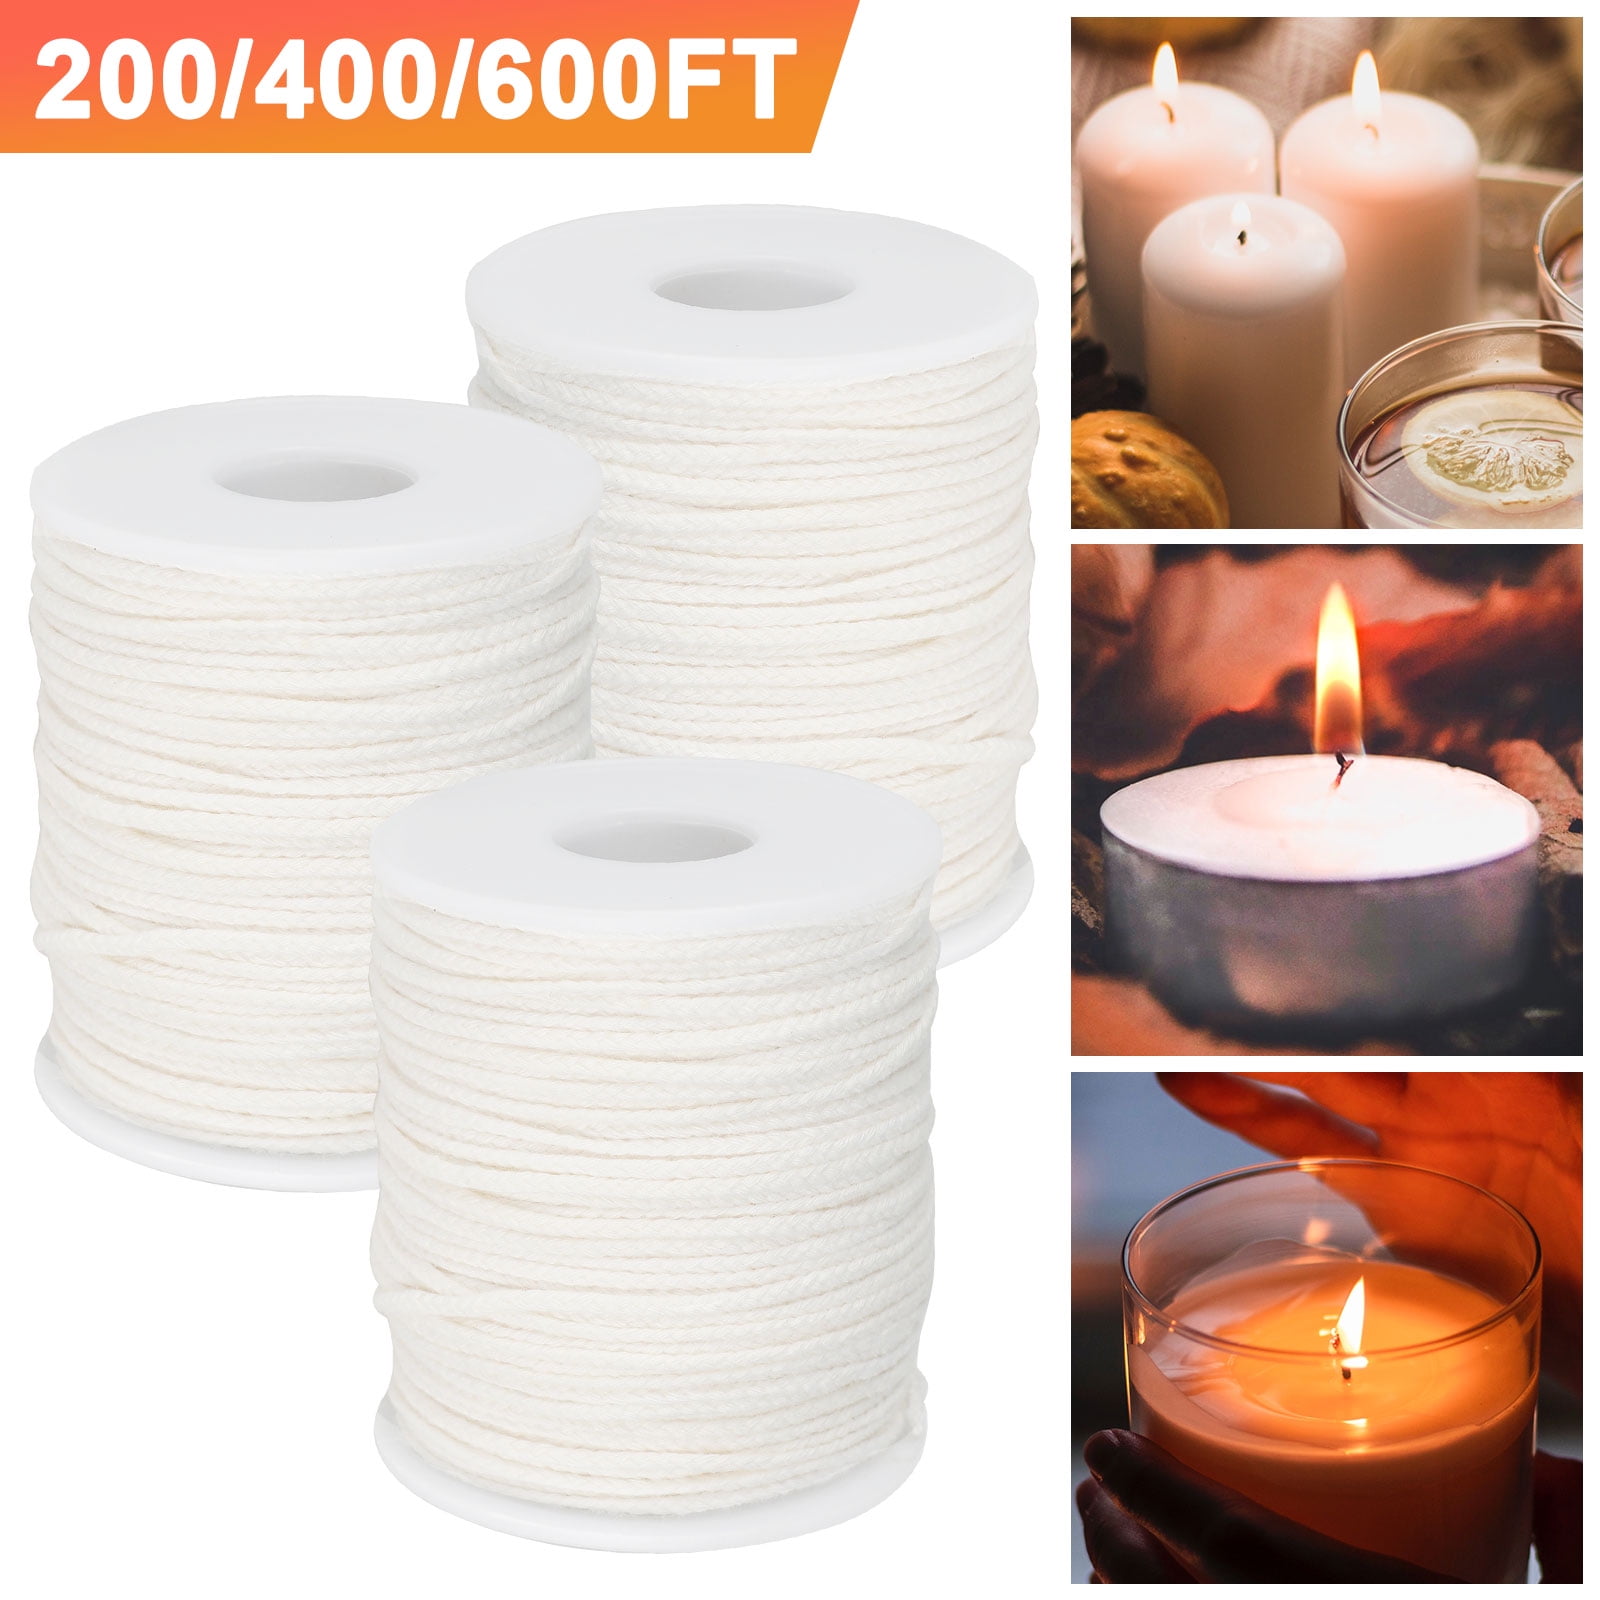 30 Pcs x 30mm 5cm Pre Waxed Wicks For candle making with sustainers. 